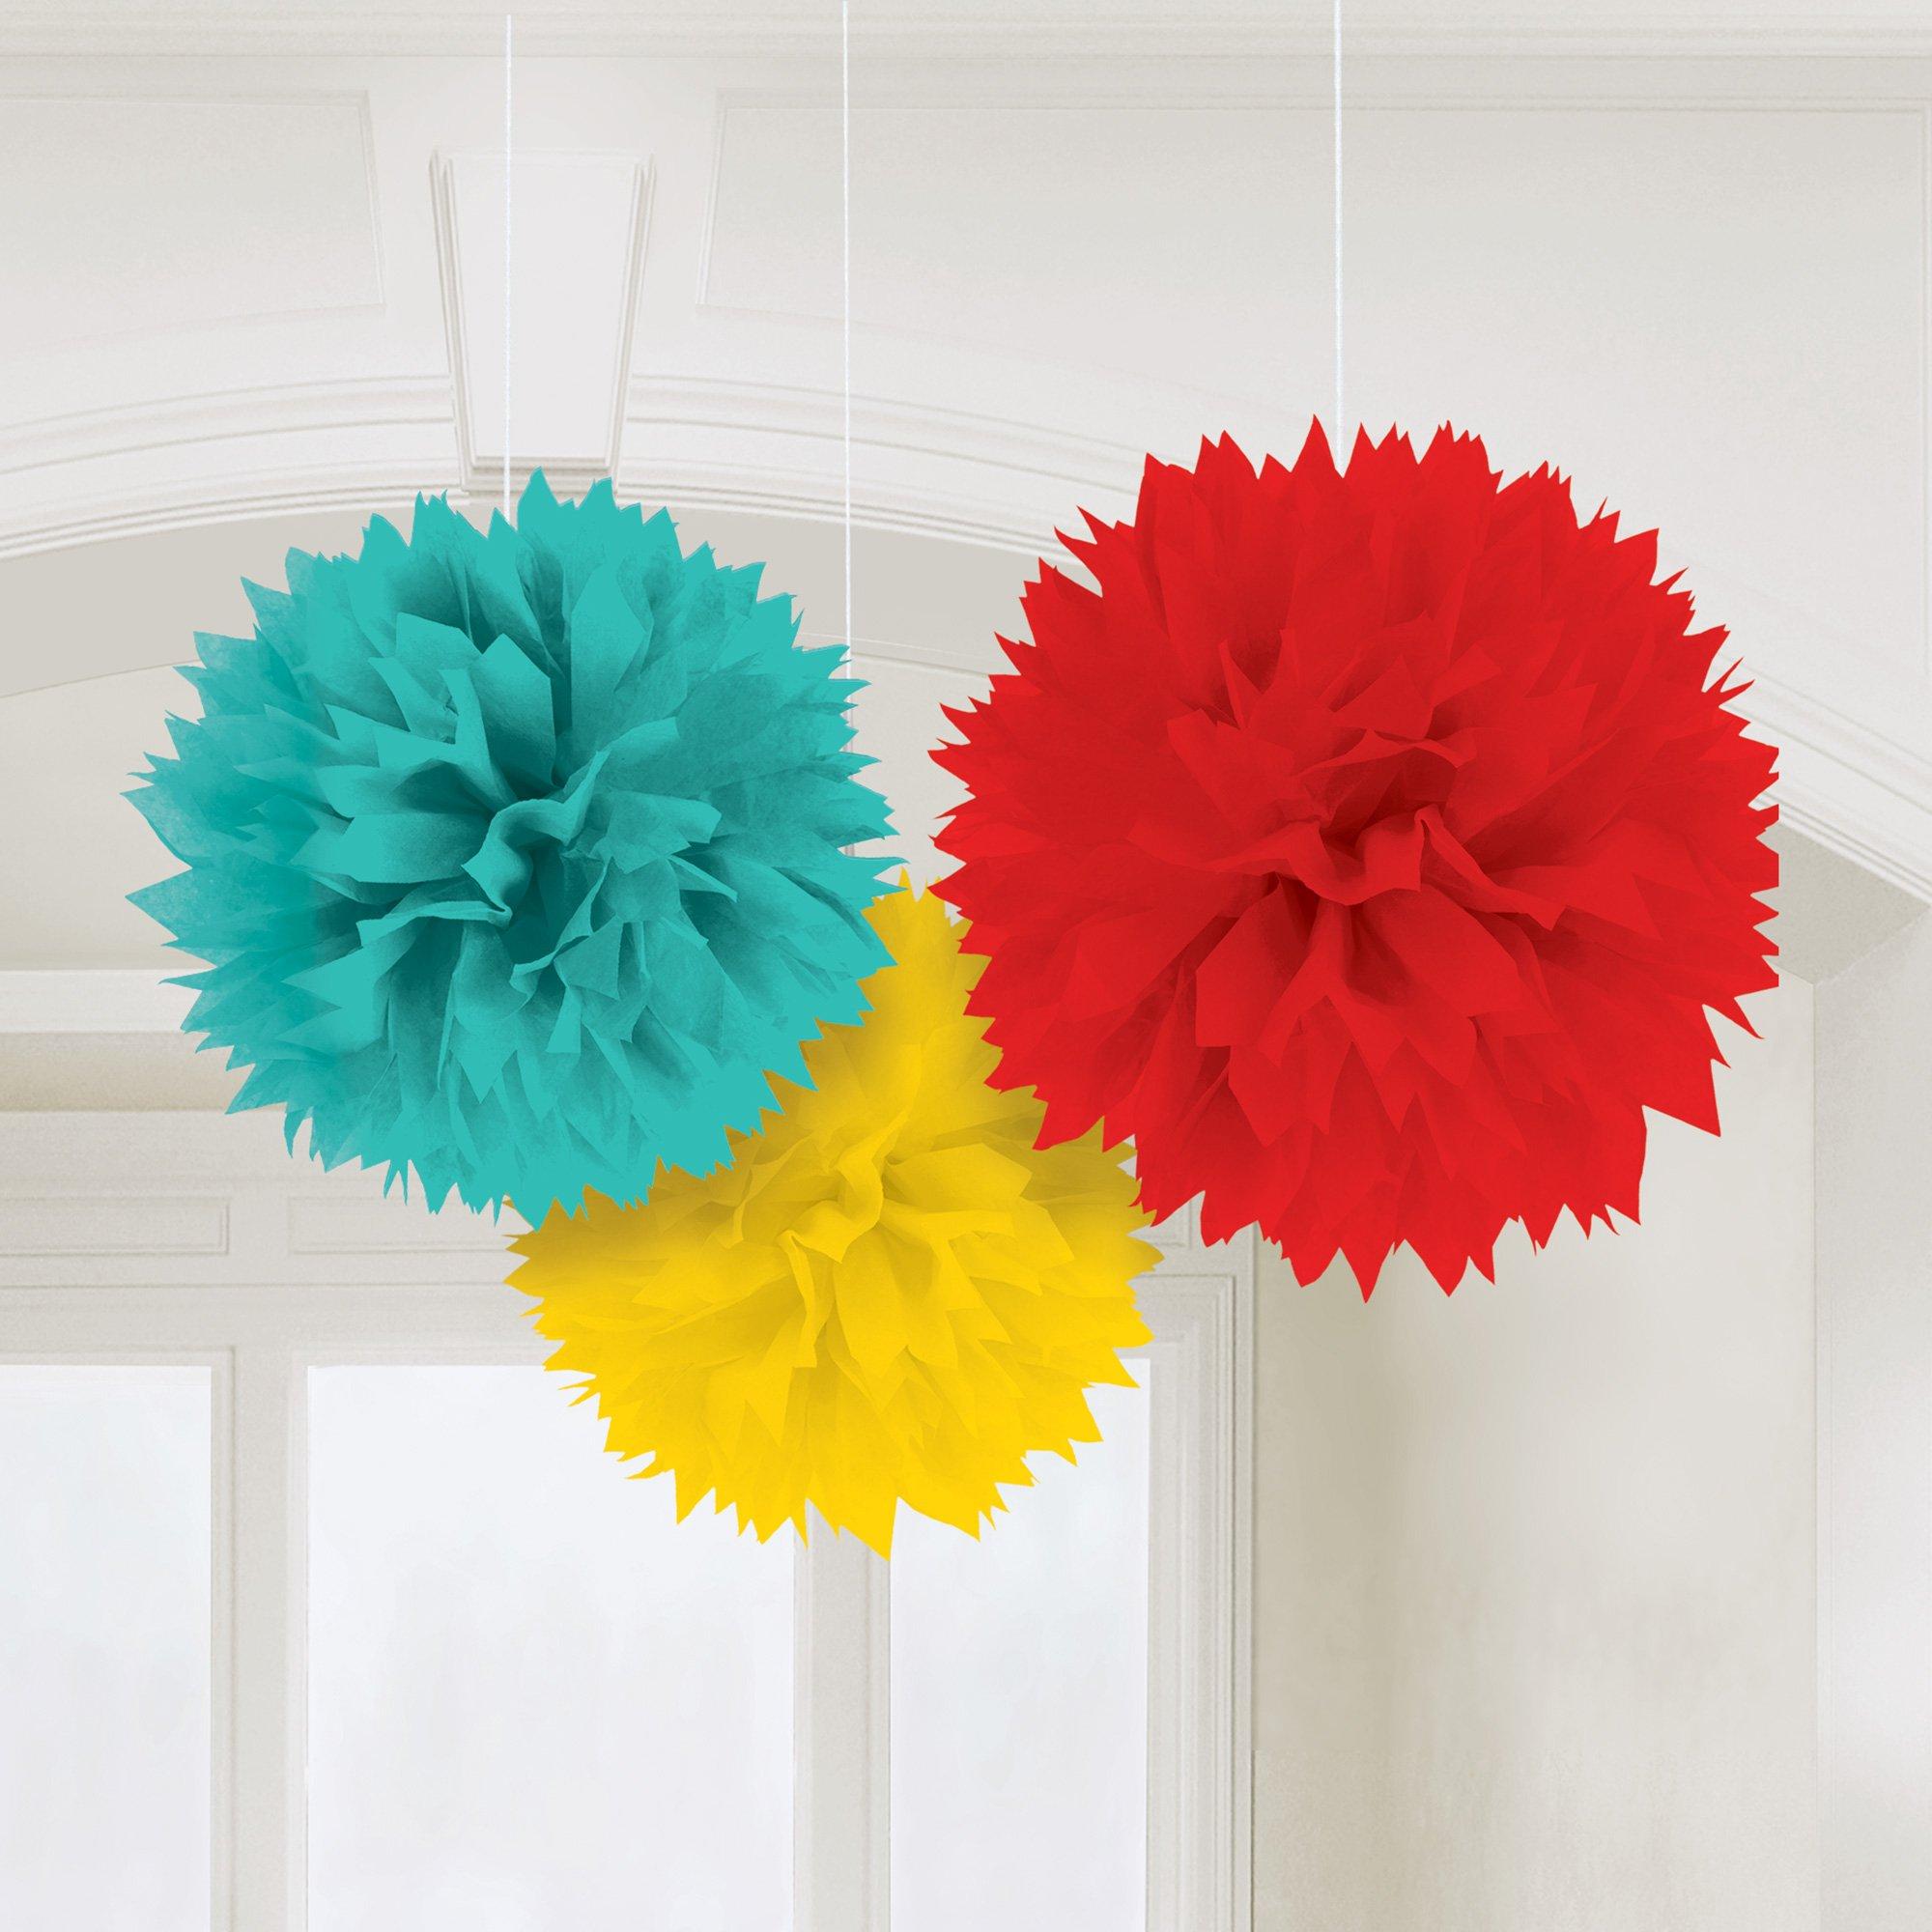 Rainbow Party Decorations for Birthday, Include Tissue Pom Pom Flowers,  Paper Fa 705353030925